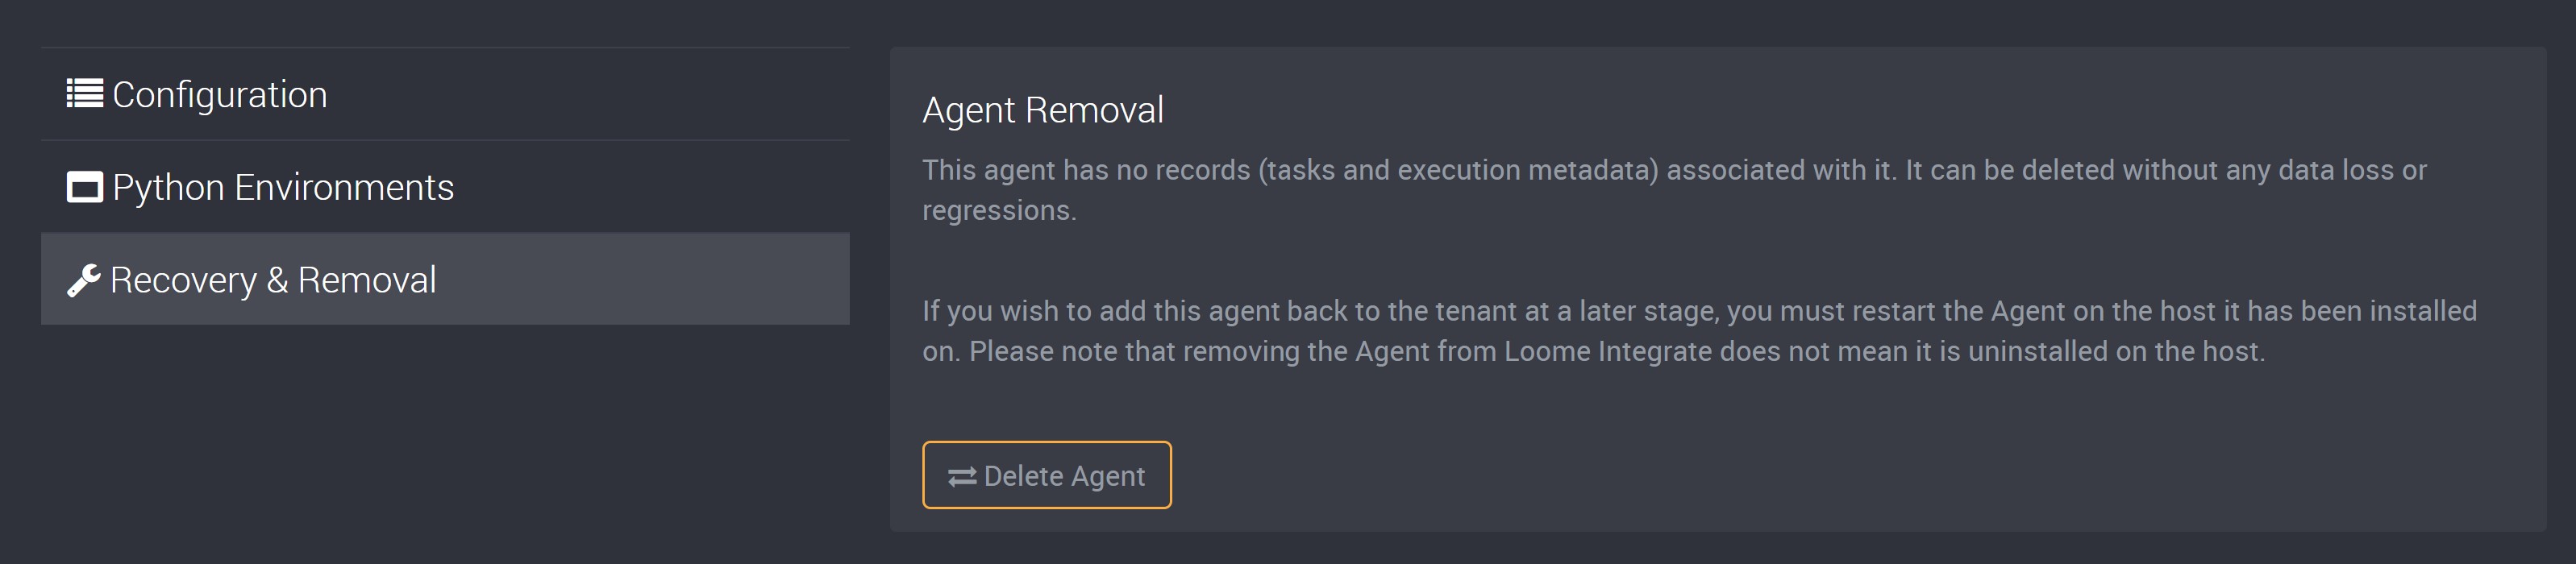 Delete an agent that has no associated tasks